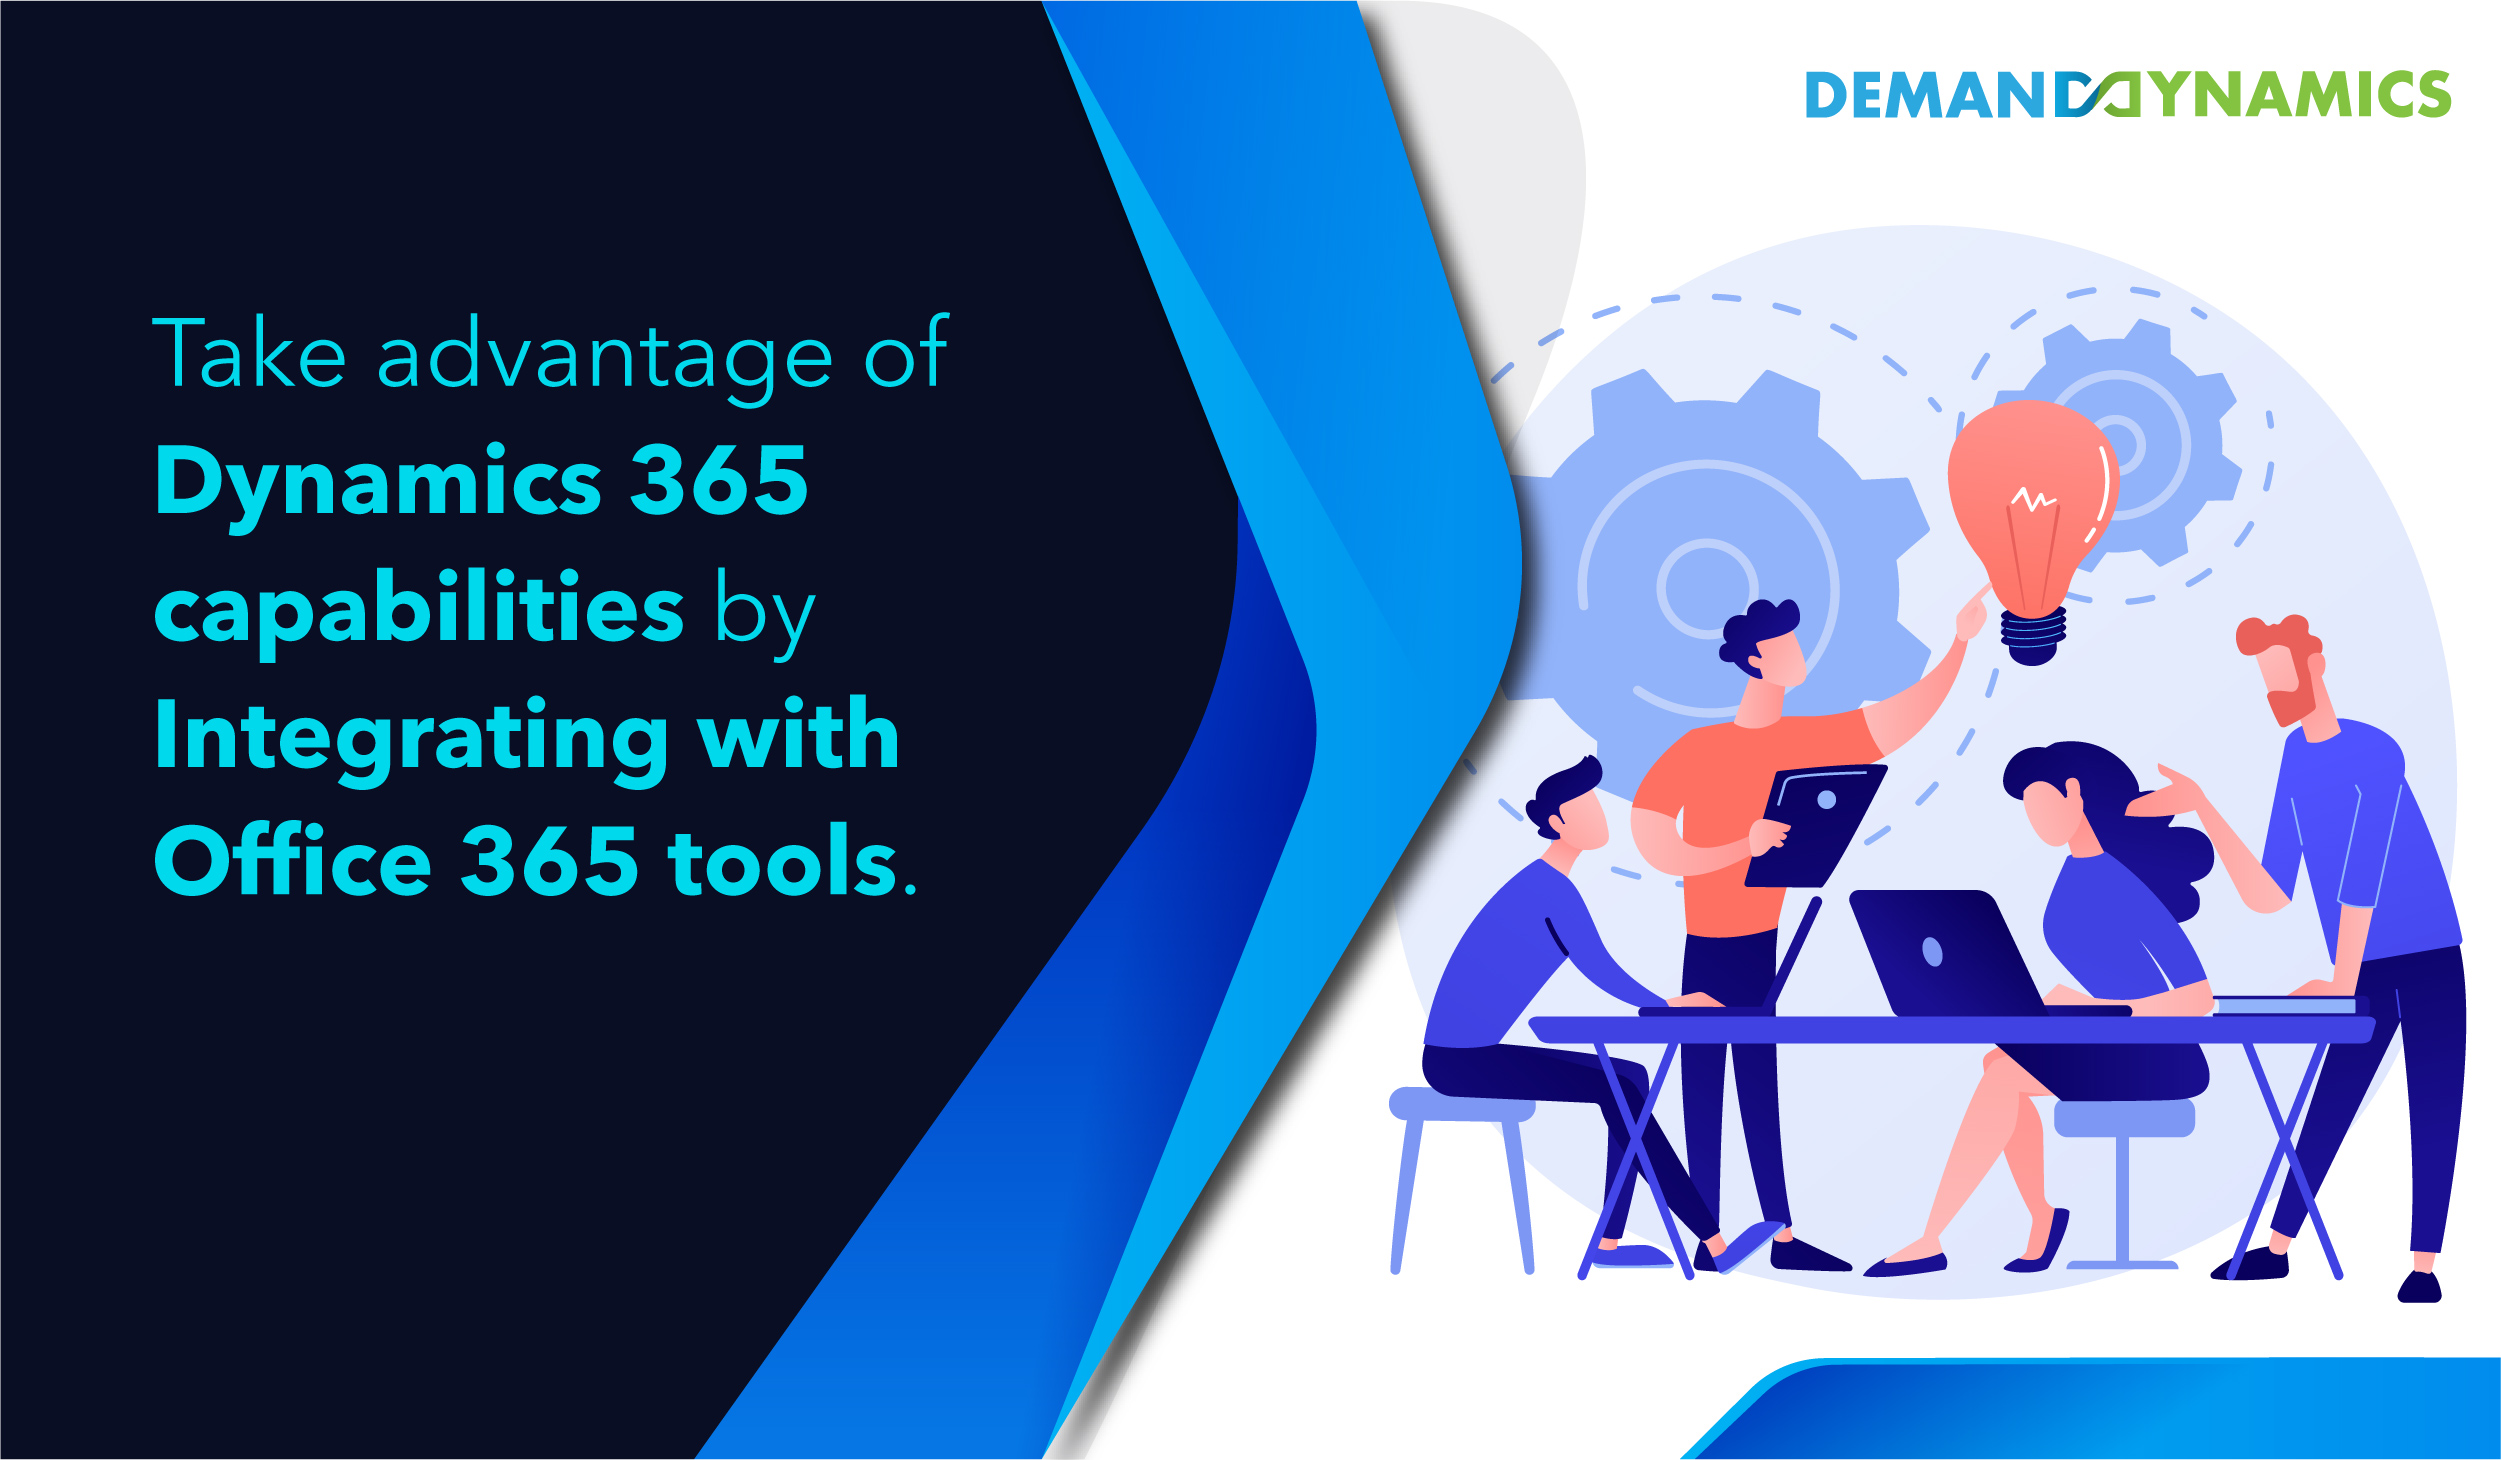 Benefits of Integrating Dynamics 365 with Office 365